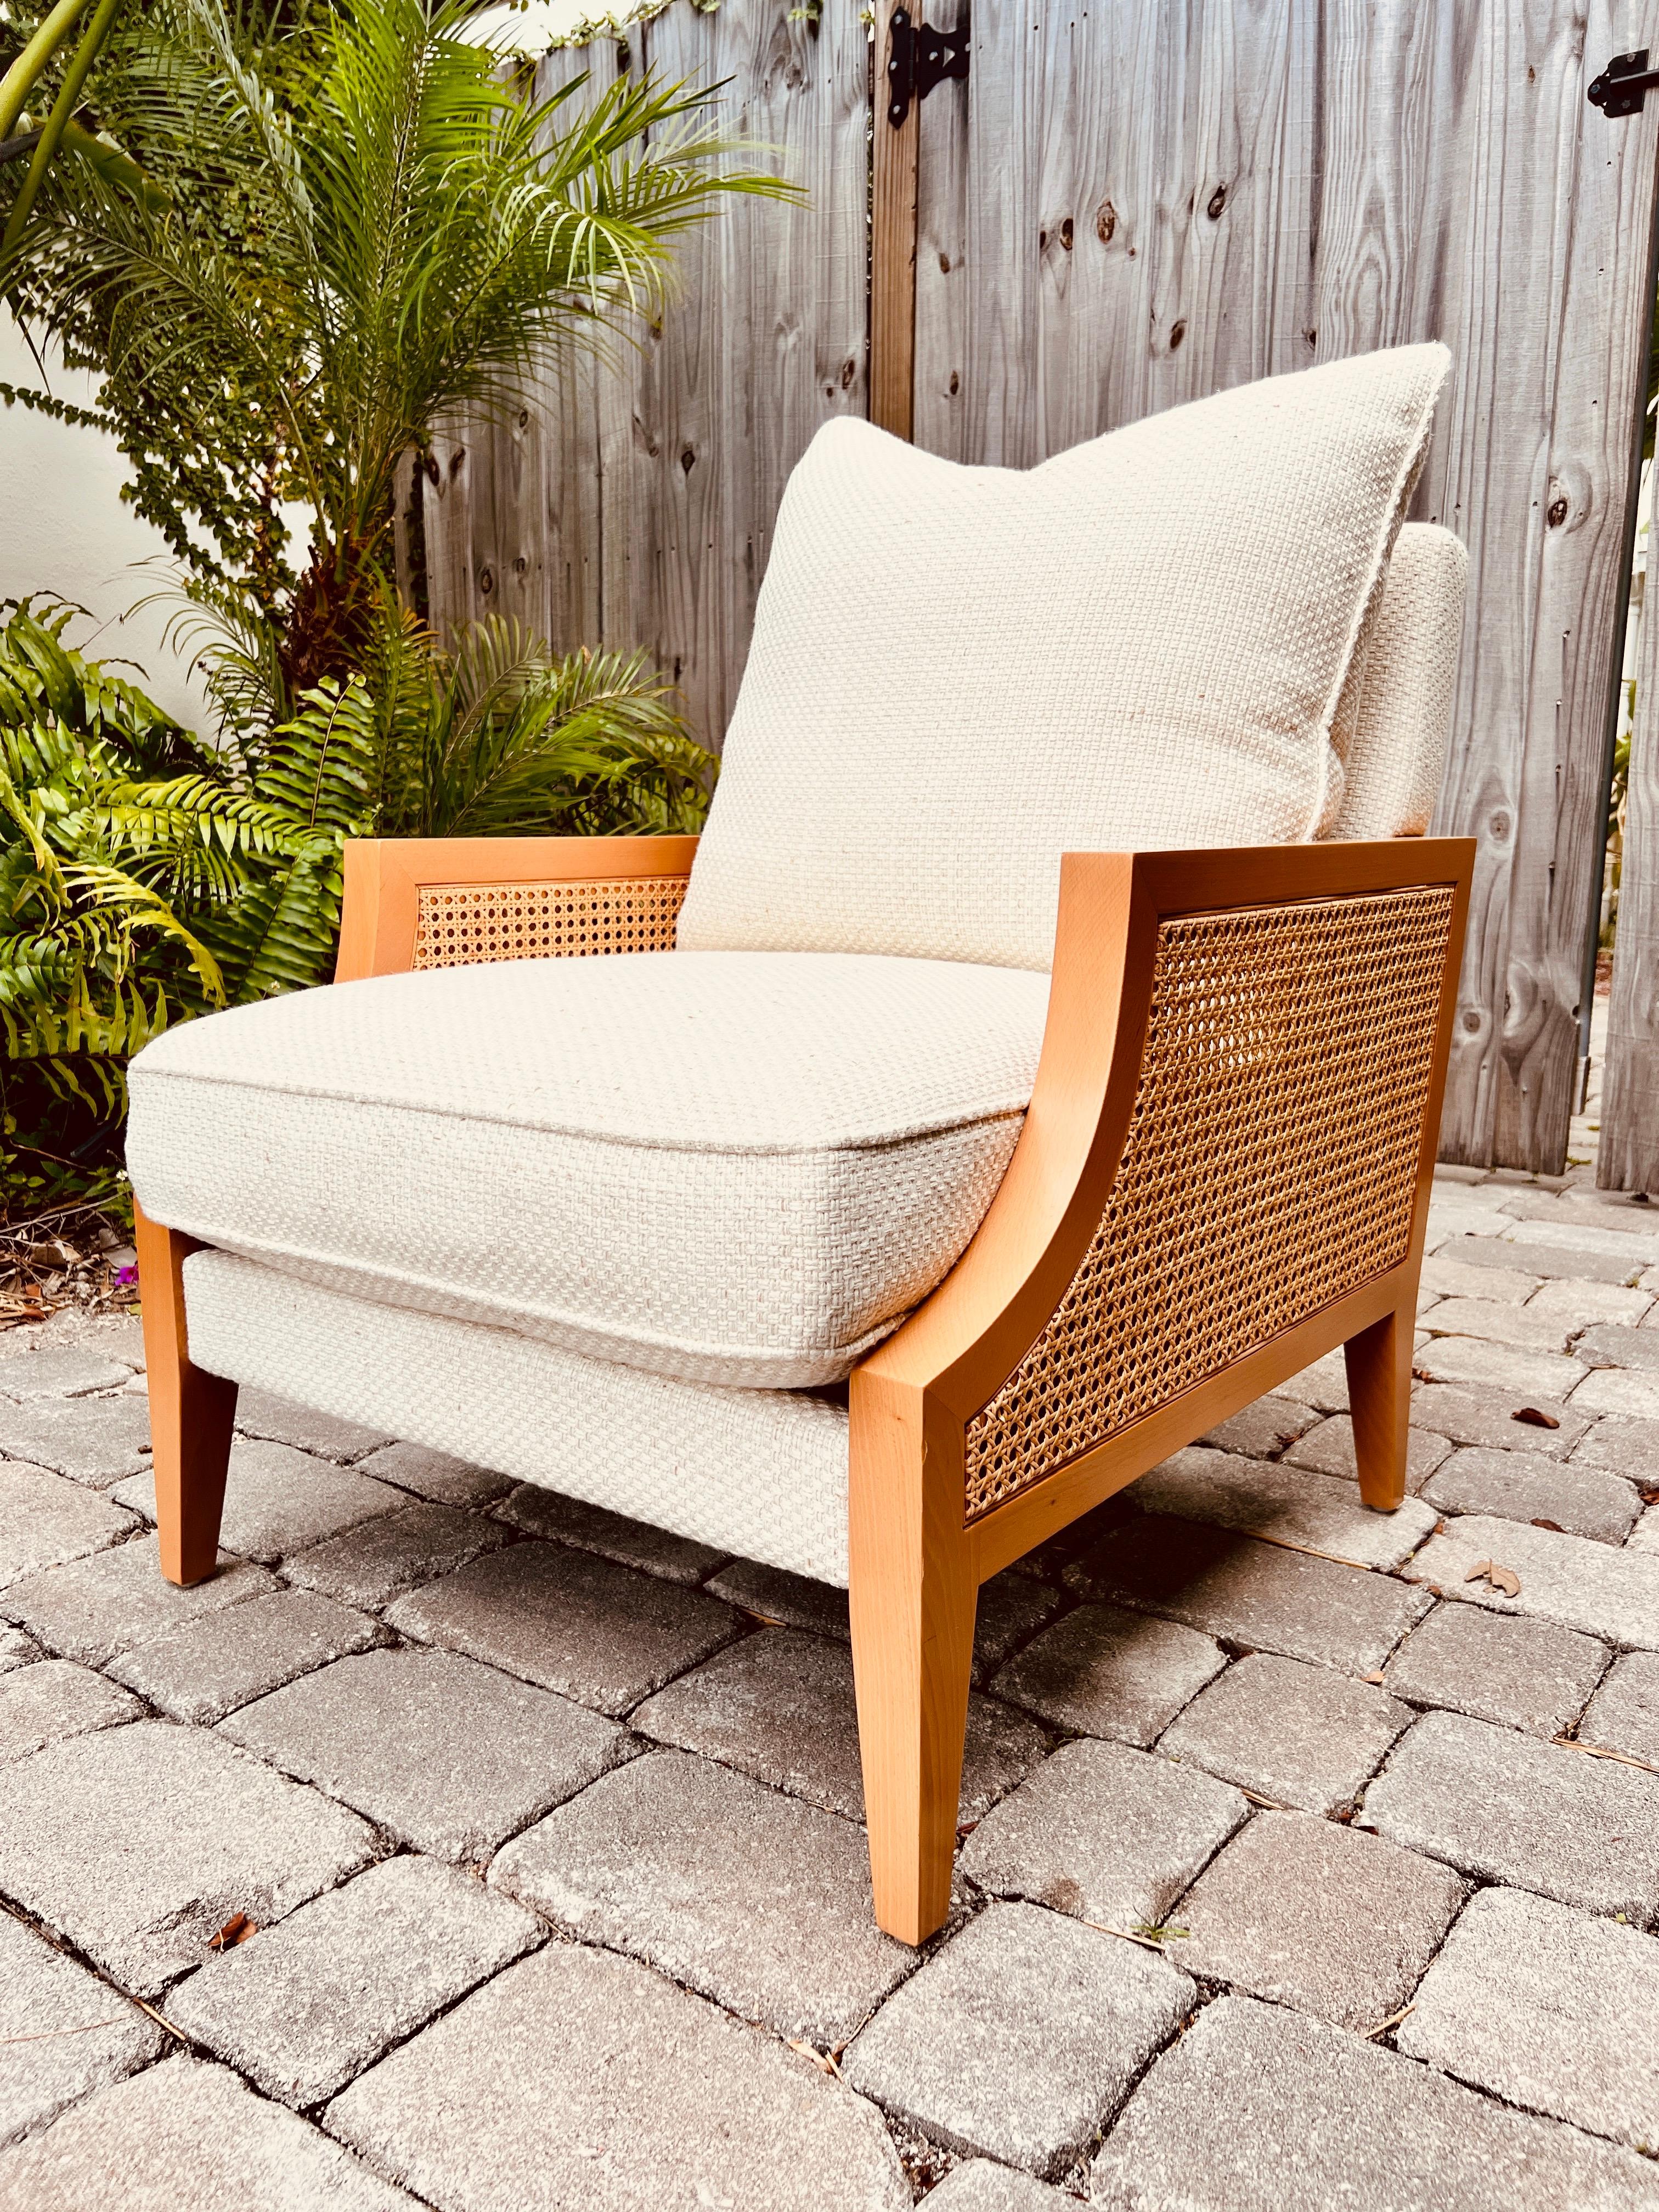 Beechwood and Cane Lounge Chair in Ivory Basketweave by Pierre Frey For Sale 3